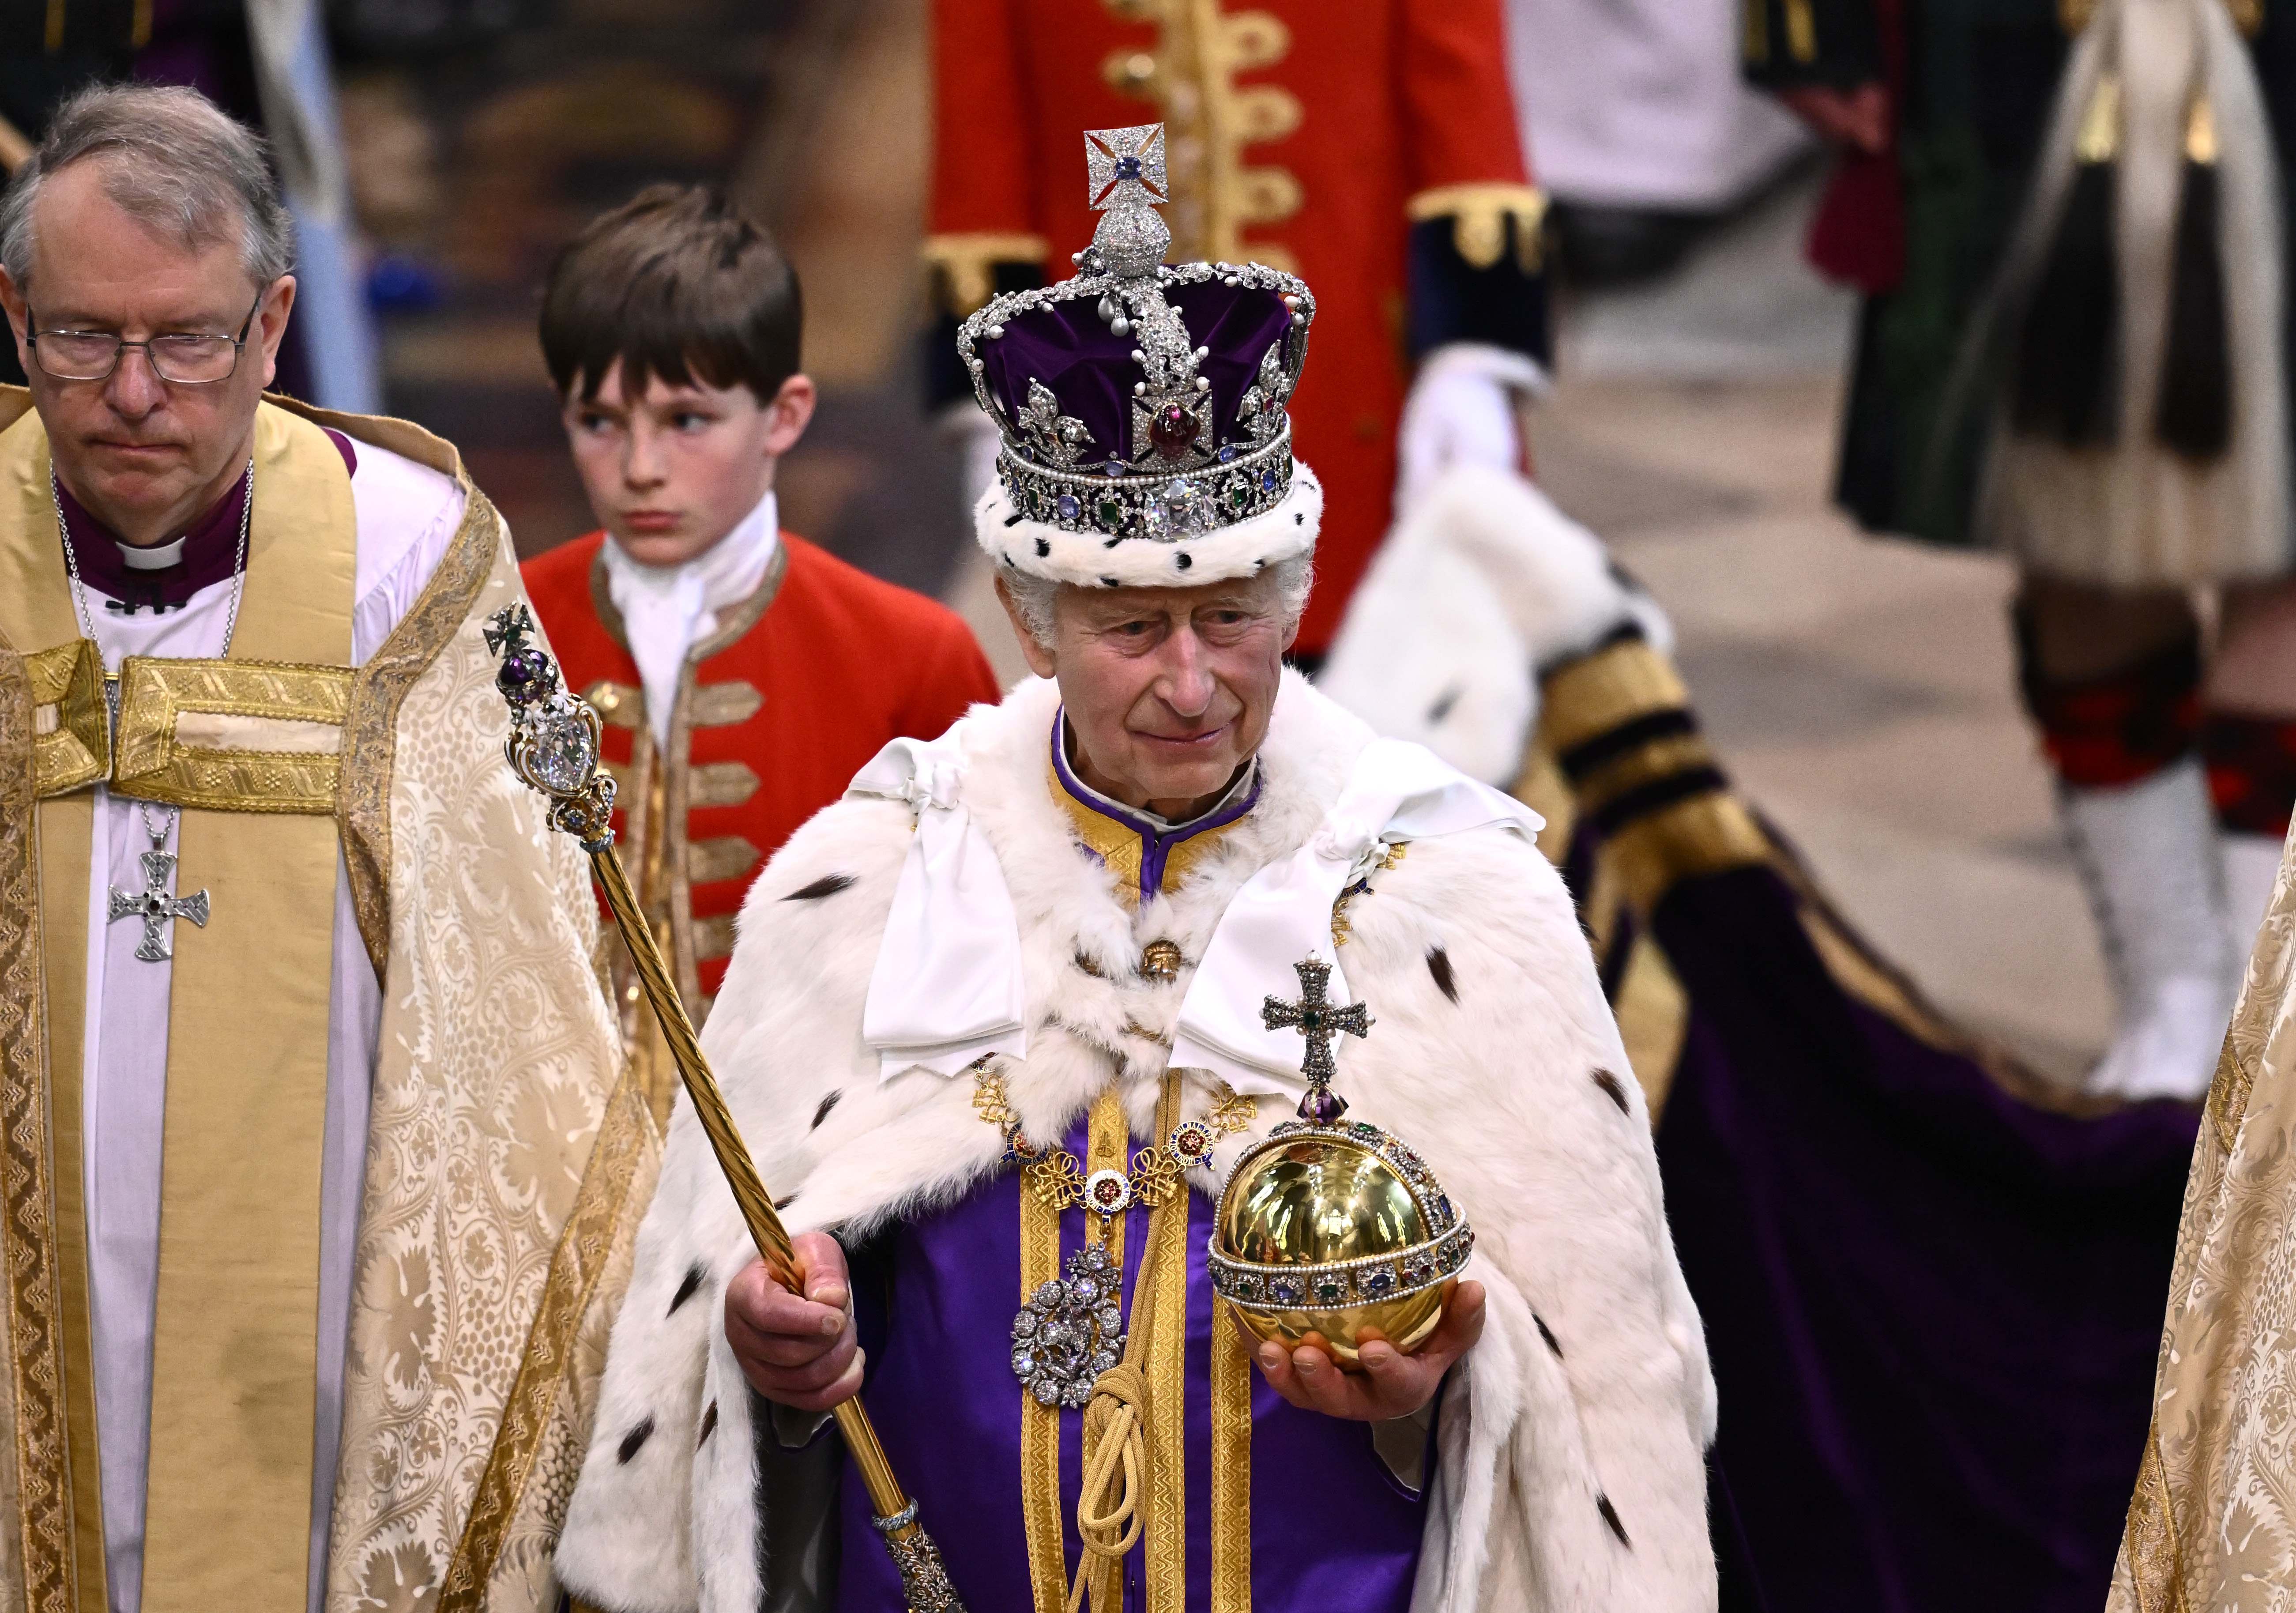 King Charles III departs the Coronation service at Westminster Abbey on May 6, 2023 in London, England.